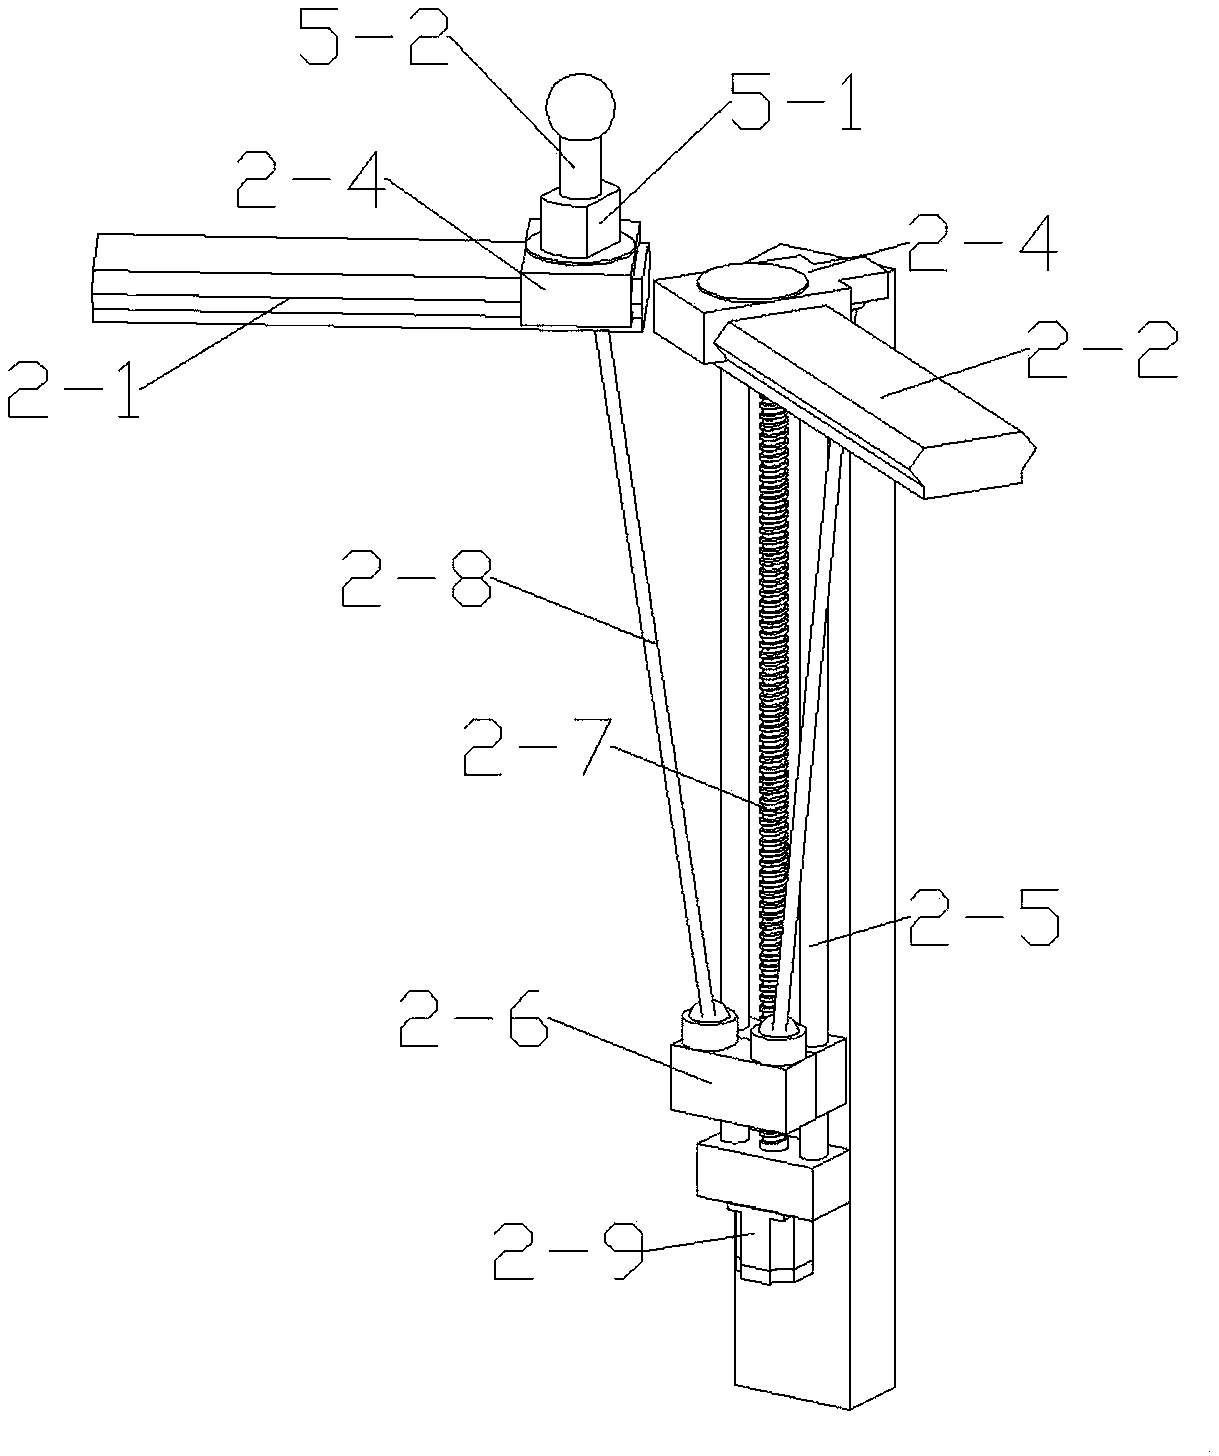 Multi-trajectory arm exercise device with auxiliary power